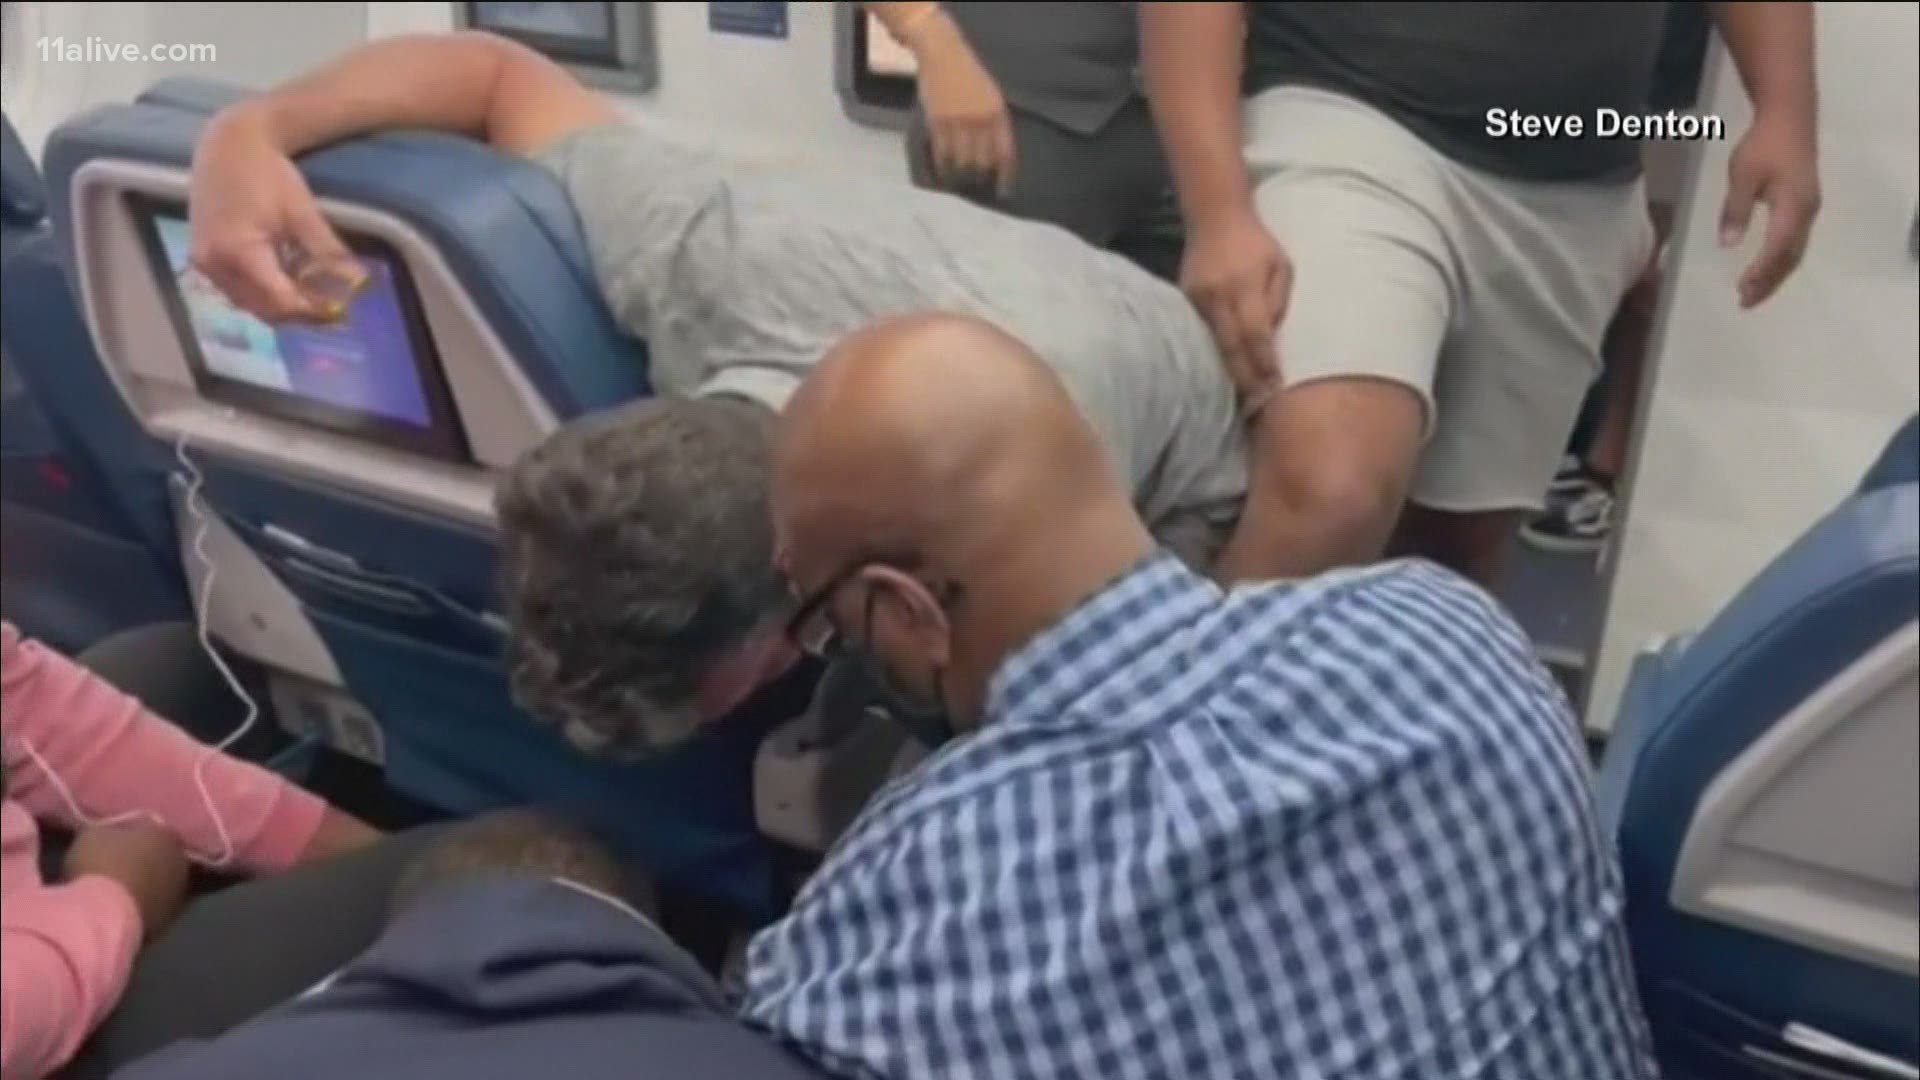 The crew had to make an emergency stop in Oklahoma City as the confrontation between the man and Delta staff broke out mid-flight.